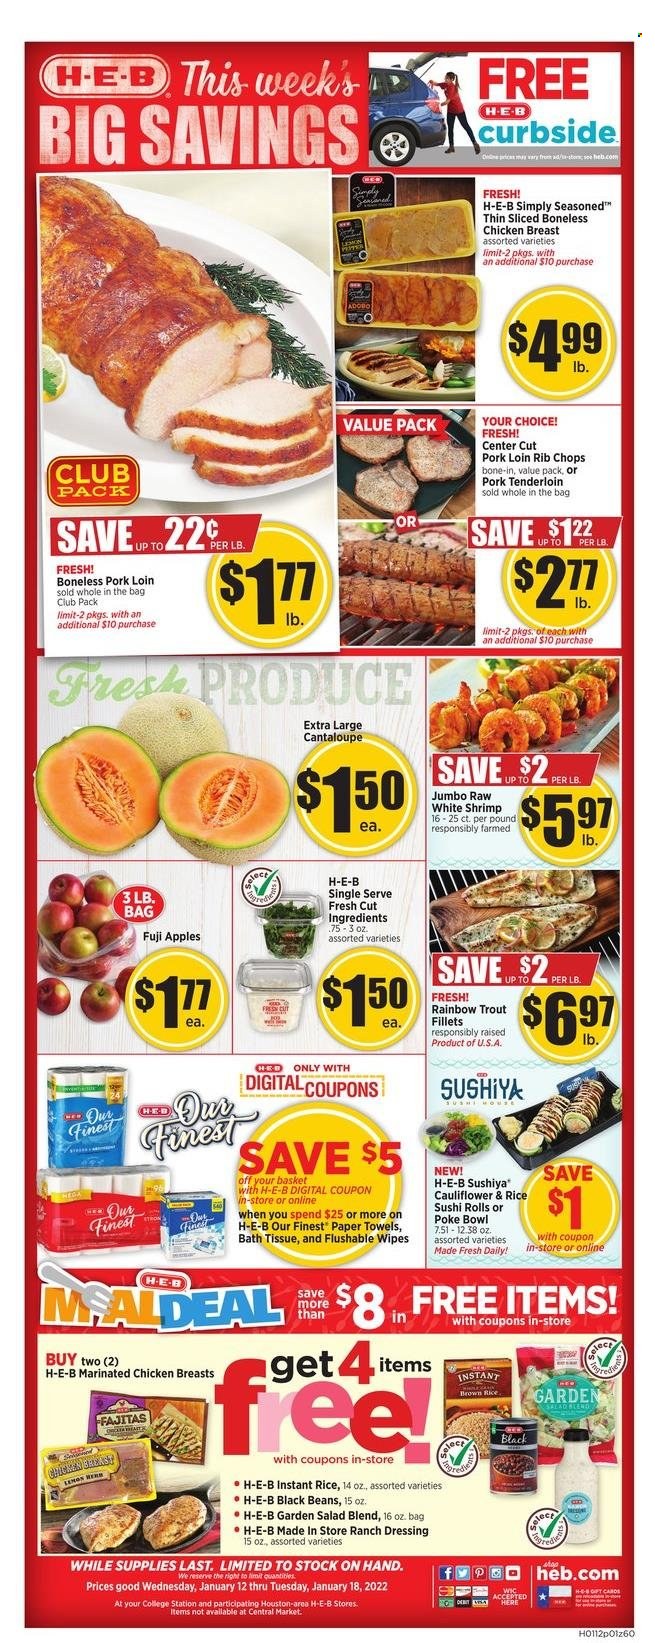 thumbnail - H-E-B Flyer - 01/12/2022 - 01/18/2022 - Sales products - cantaloupe, apples, Fuji apple, trout, shrimps, fajita, ranch dressing, black beans, adobo sauce, dressing, chicken breasts, marinated chicken, pork loin, pork meat, pork tenderloin, rib chops, wipes, bath tissue, kitchen towels, paper towels, bowl. Page 1.